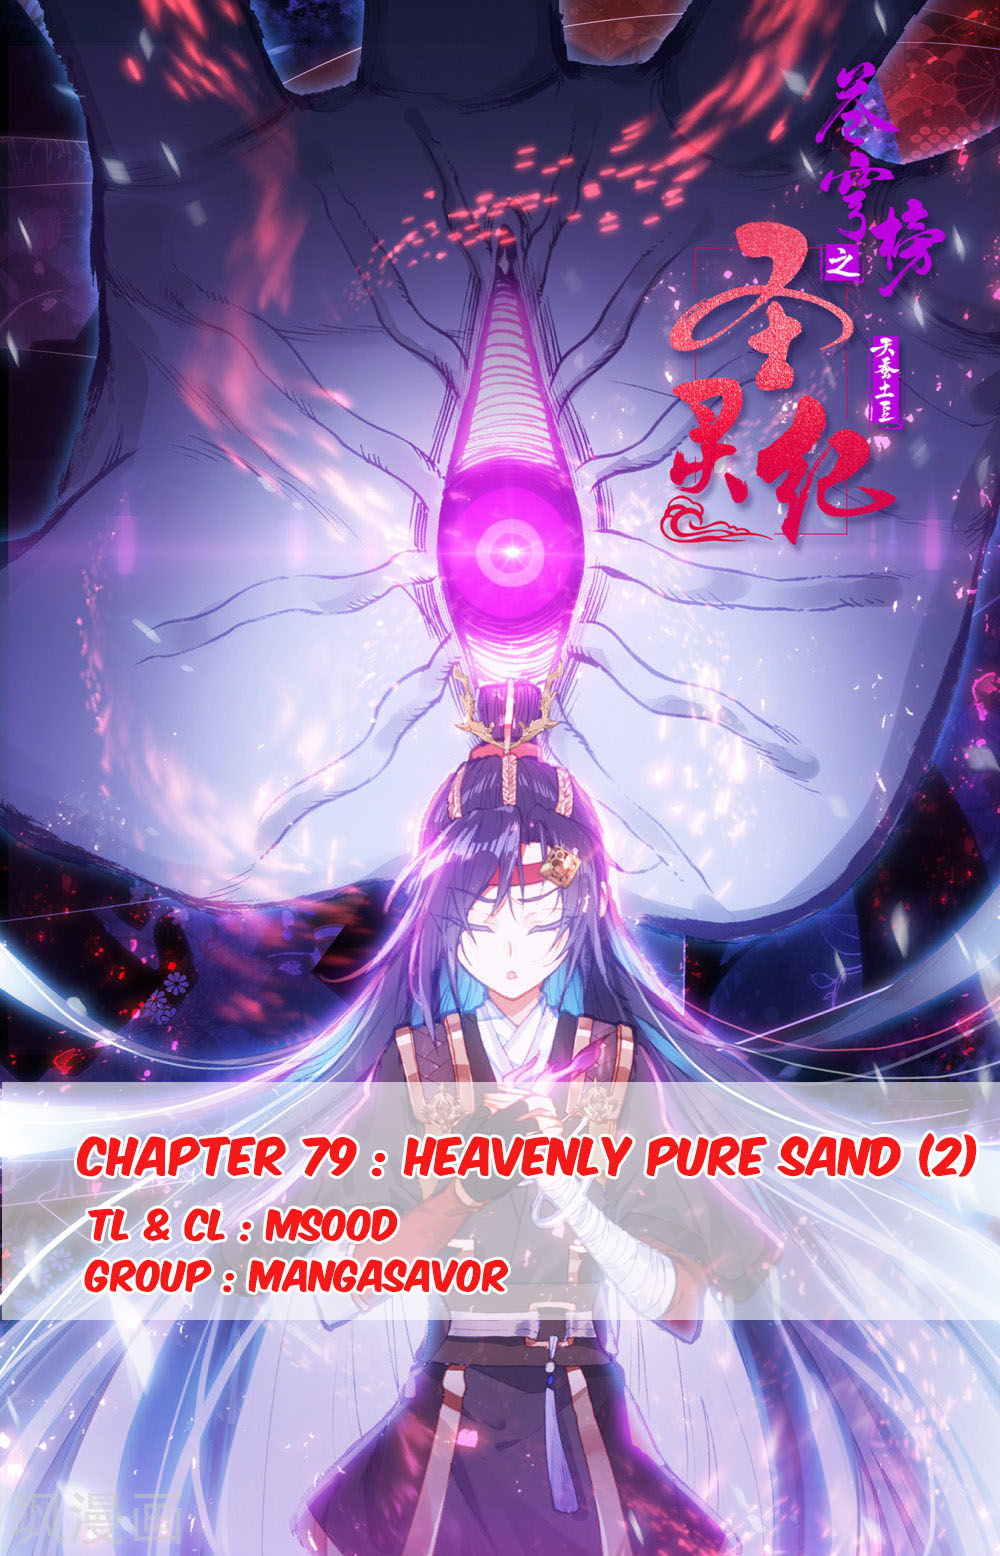 The Heaven's List Ch. 79.5 Heavenly Pure Sand (2)